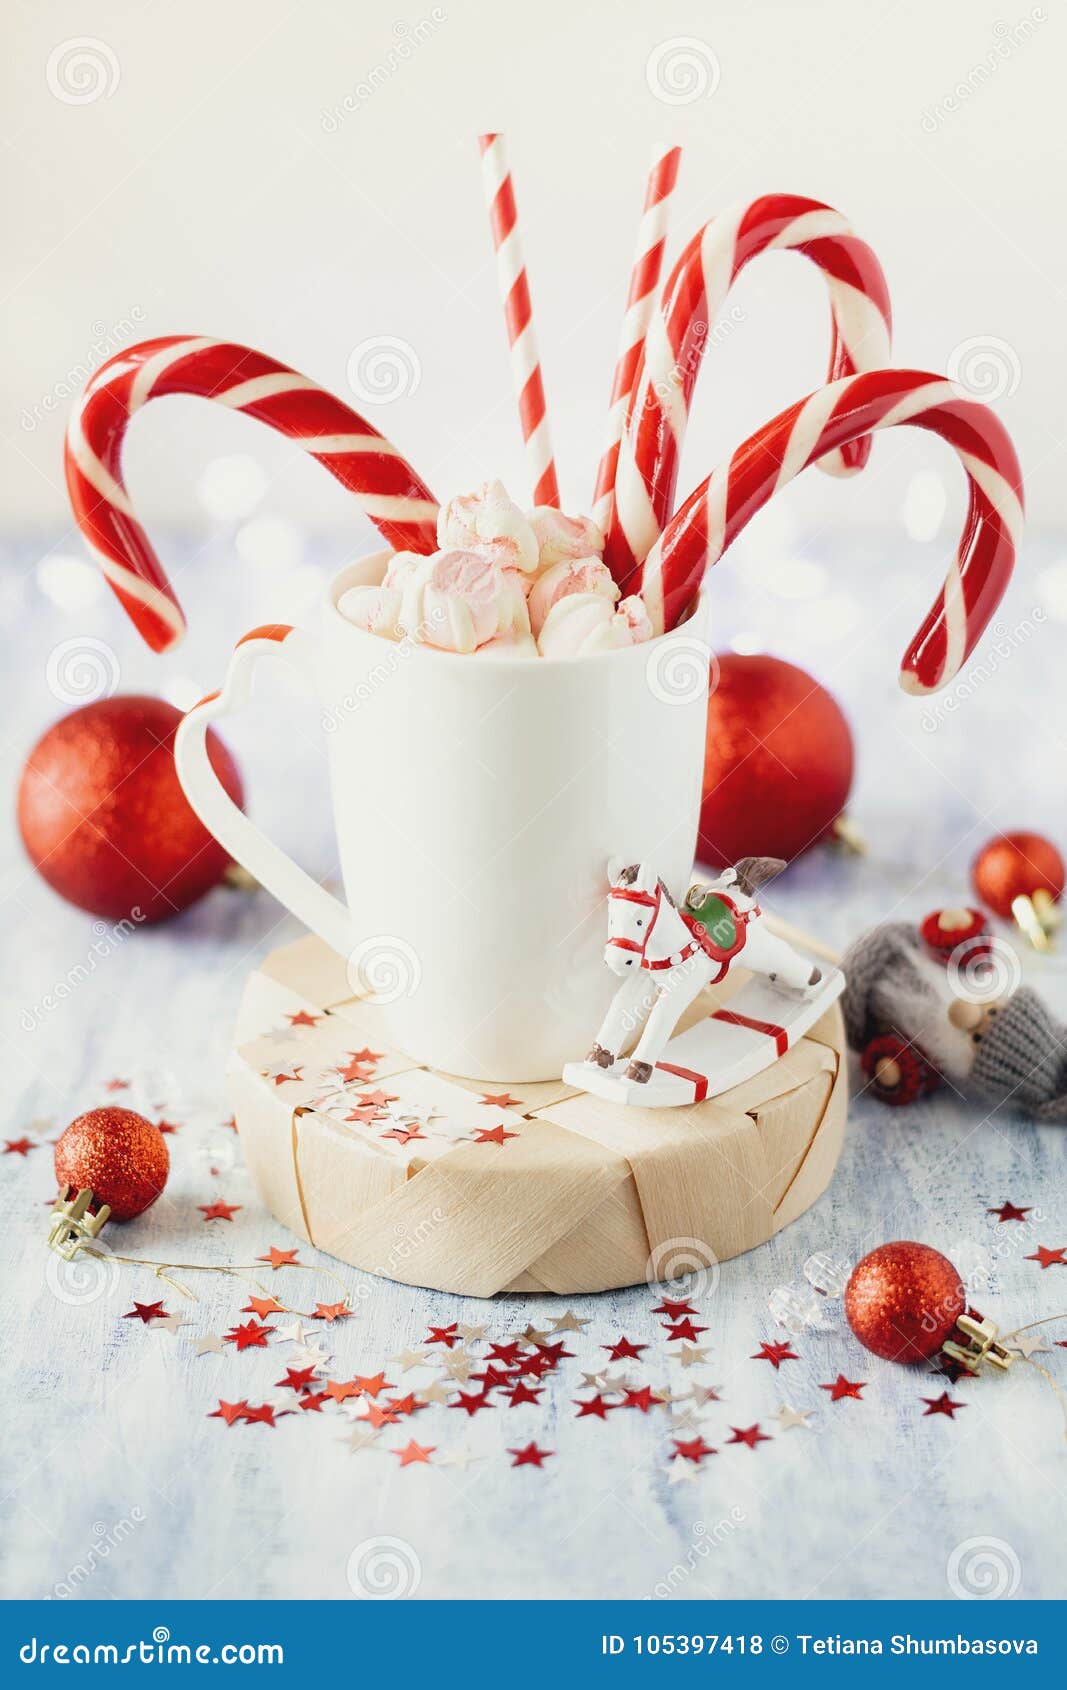 https://thumbs.dreamstime.com/z/cup-hot-cocoa-marshmallows-candy-canes-blue-rustic-background-christmas-lights-bokeh-cup-hot-cocoa-105397418.jpg